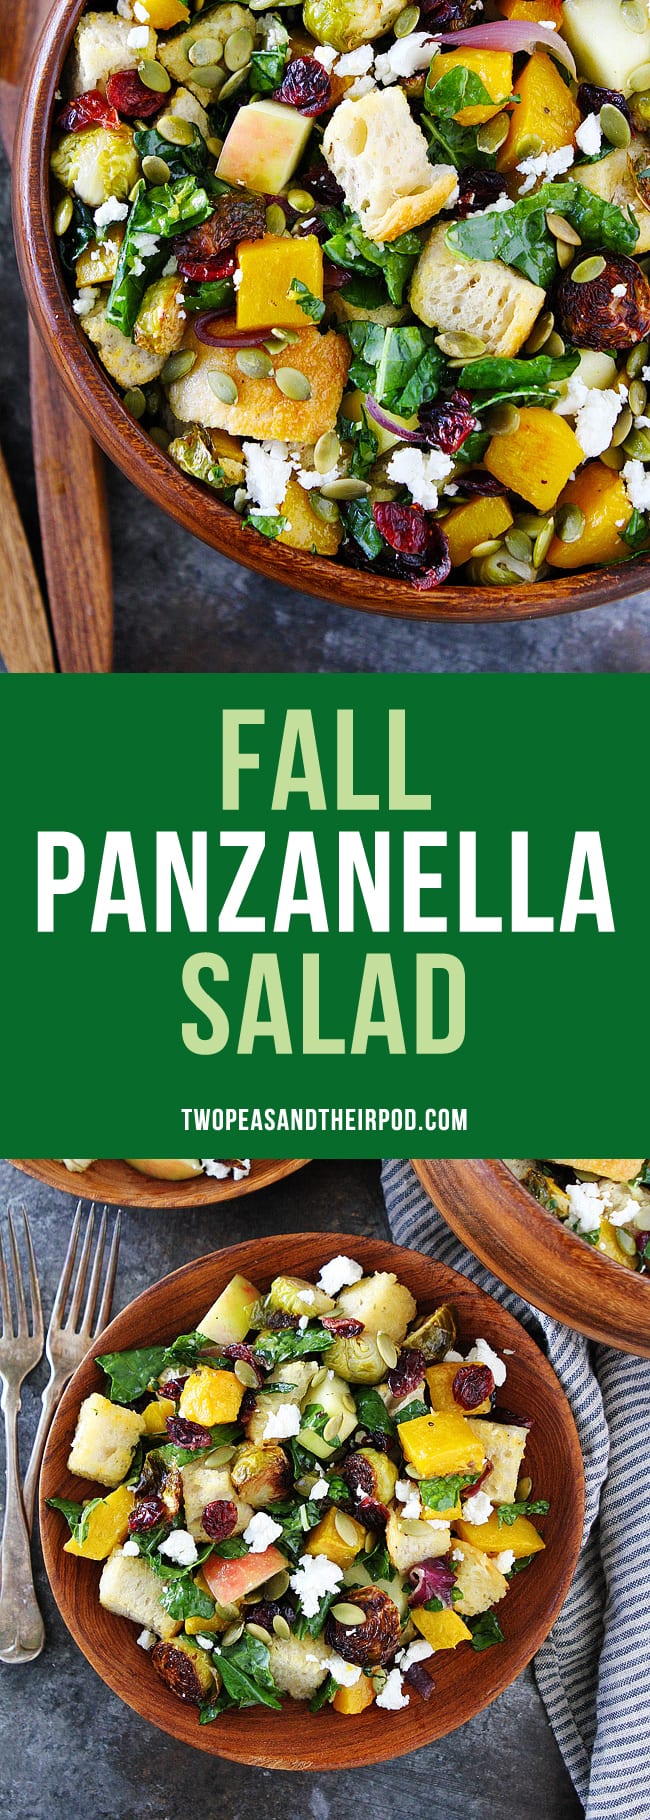 Fall Panzanella Salad-bread salad with butternut squash, brussels sprouts, apple, dried cranberries, pepitas, goat cheese, and kale. This easy fall salad is the perfect side dish for Thanksgiving! #vegetarian #salad #Thanksgiving 